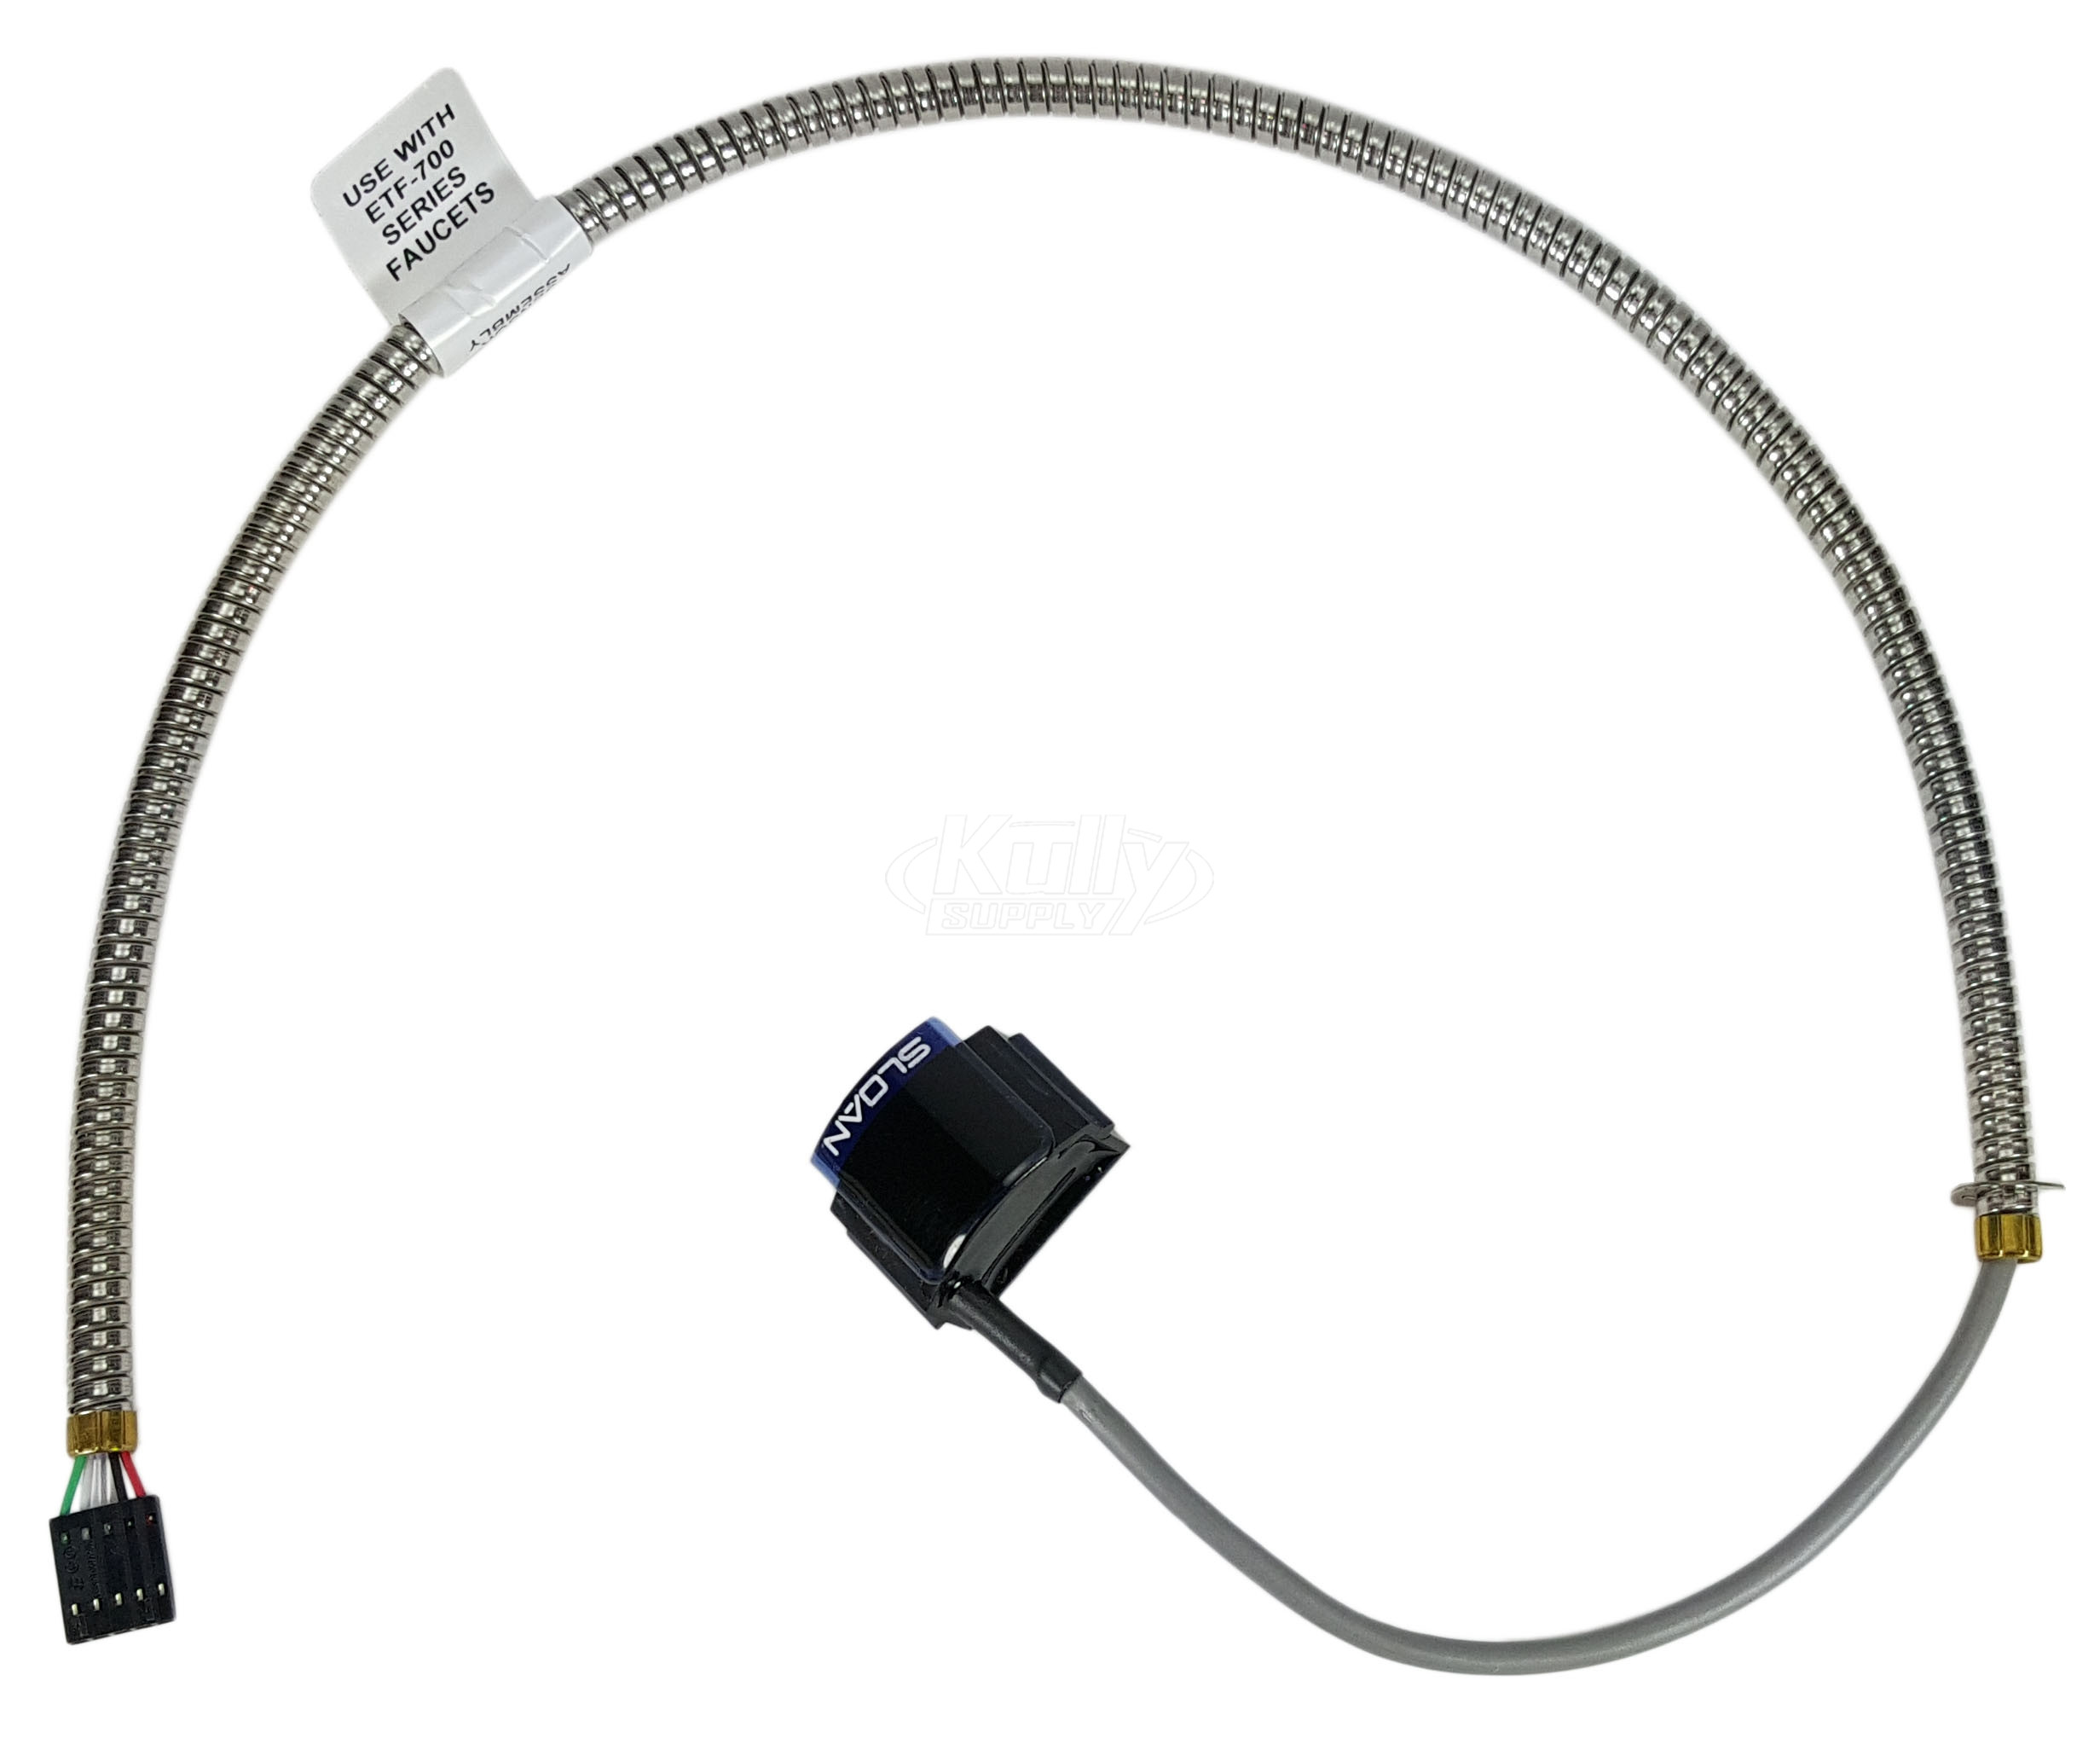 Sloan ETF-476-A Sensor Window and Cable assembly (18” armored cable, Housing for Sensor window for ETF-700)